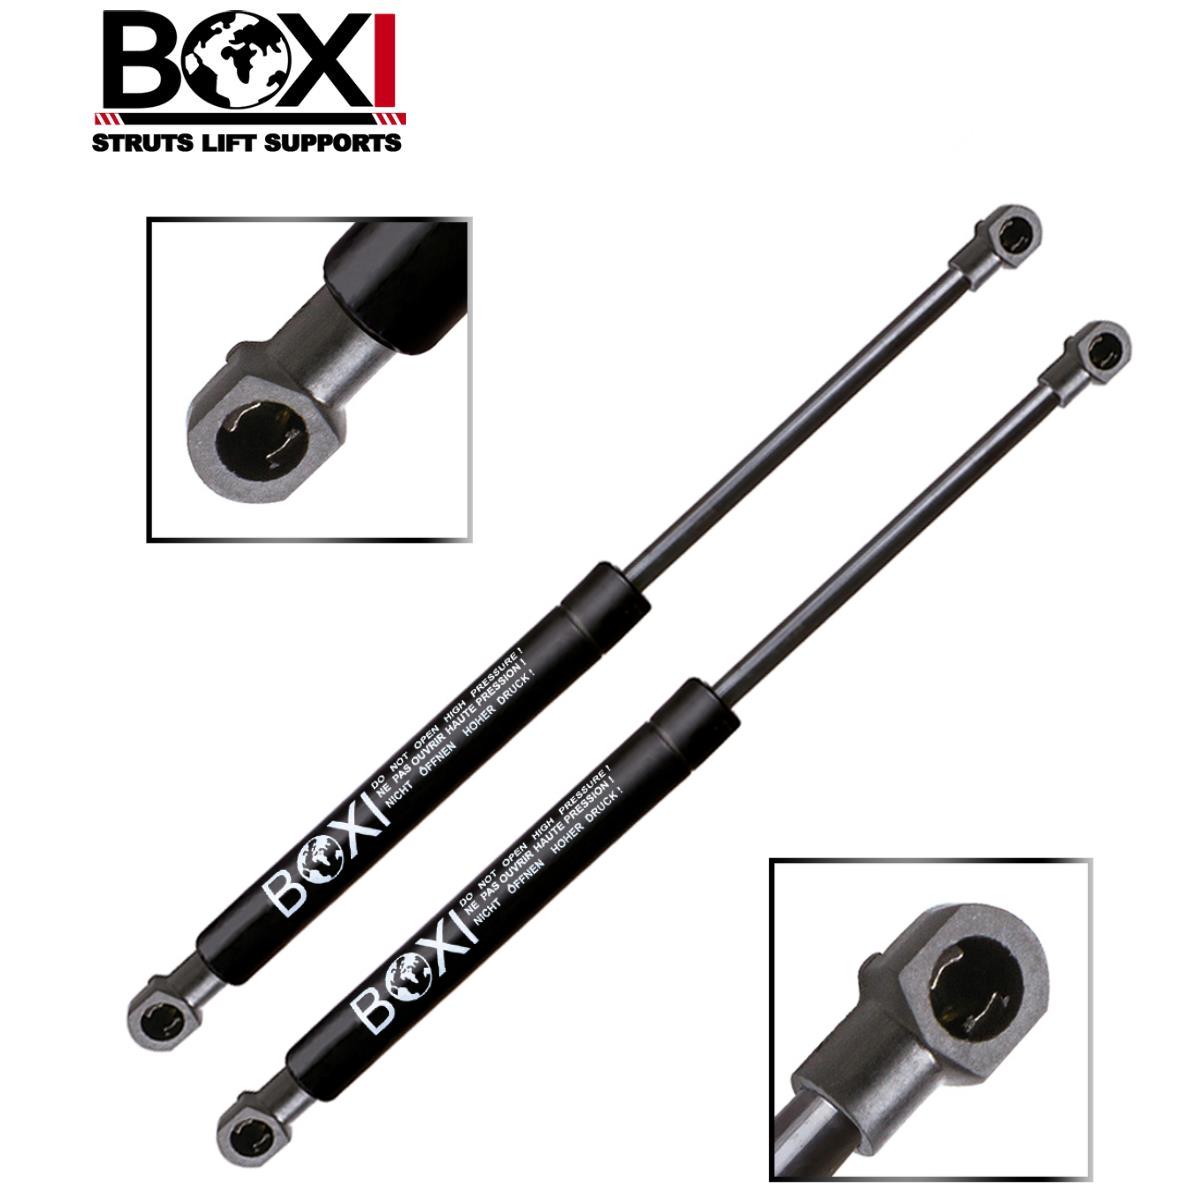 Hood Lift Support Gas Struts Fit 06-11 B-MW 323i 06 B-MW 325xi 07-13 B-MW 328i 09-13 B-MW 328i xDrive 07-08 B-MW 328xi 06 B-MW 330i 09-11 13 B-MW 335i xDrive TUPARTS Replacement Shock Lift Supports